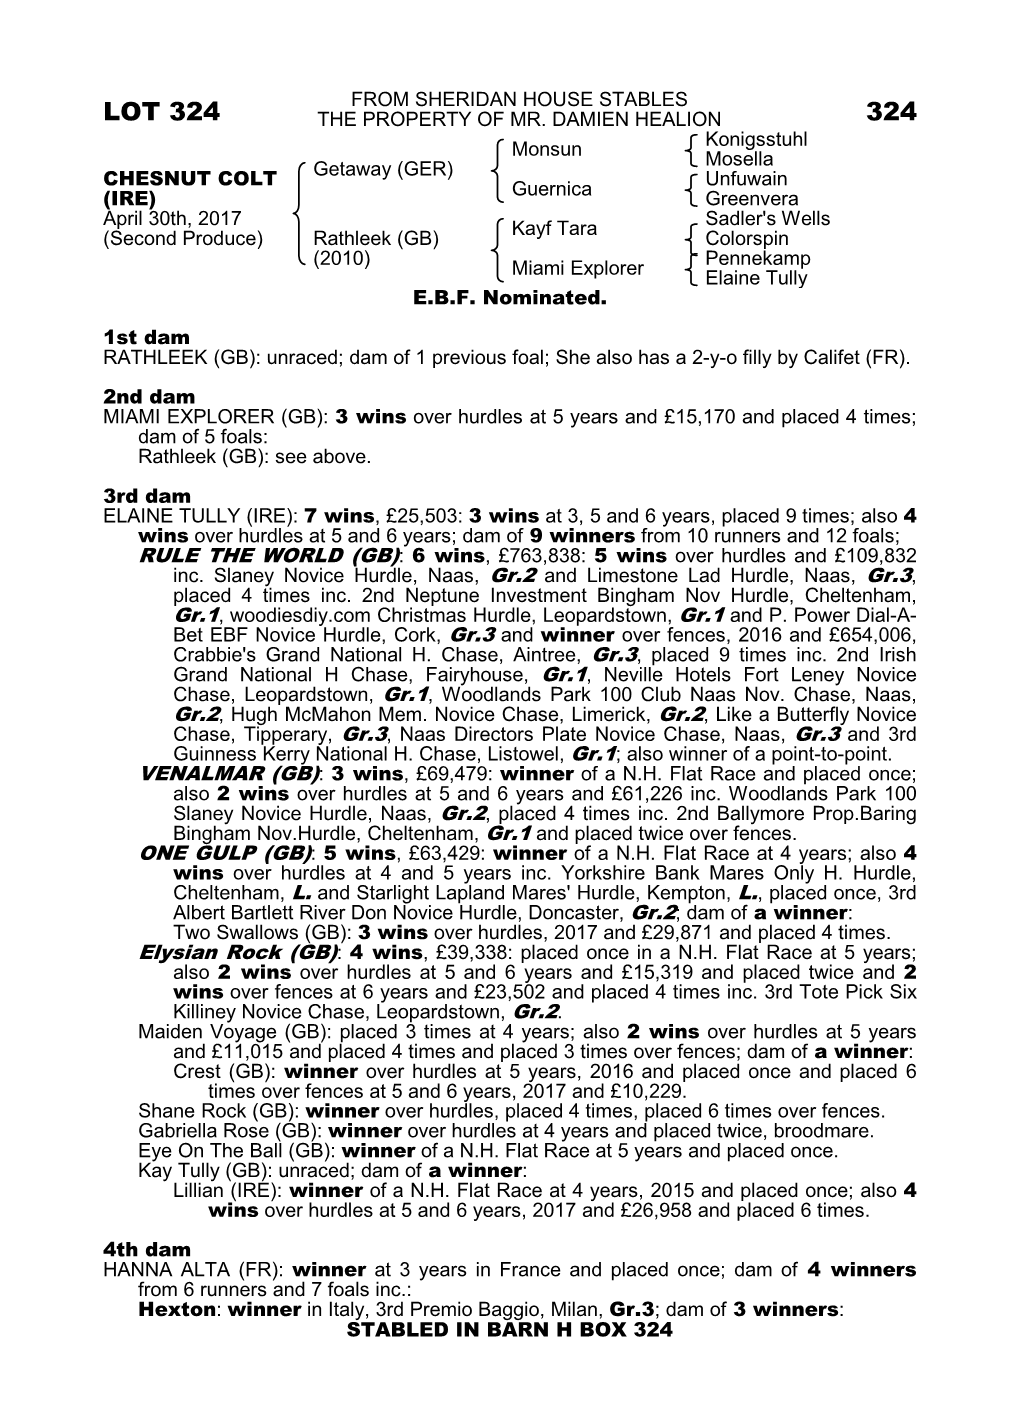 Lot 324 the Property of Mr